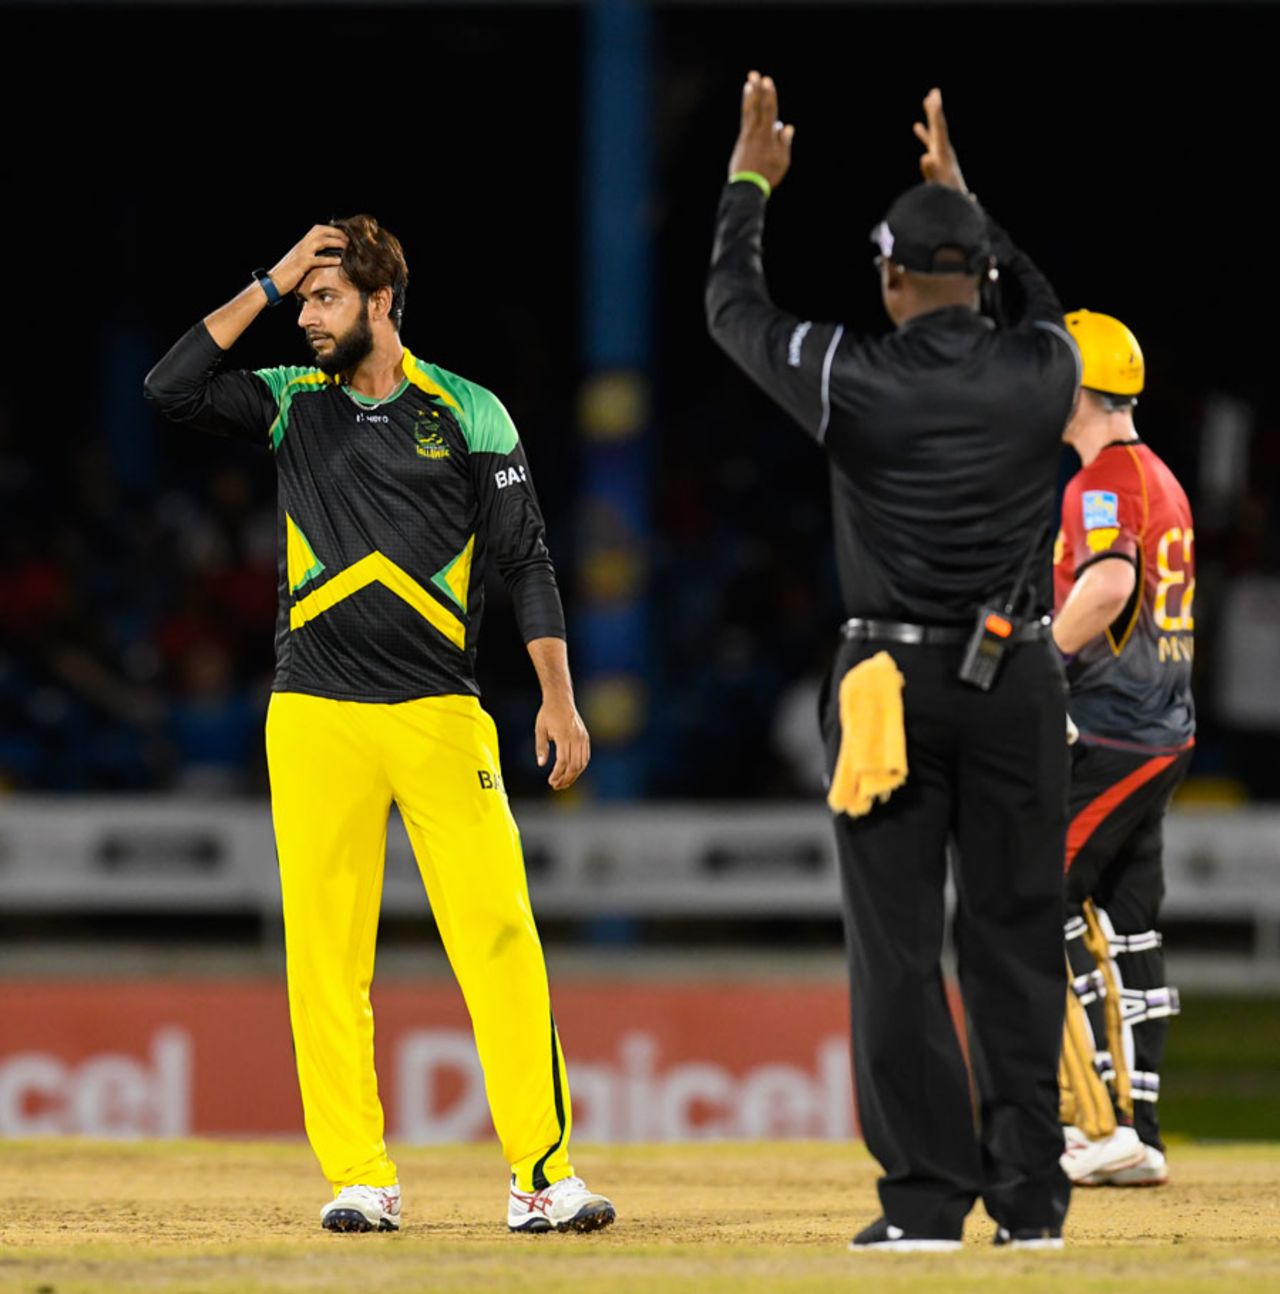 Imad Wasim looks on after being hit for six, T&T Riders v Jamaica Tallawahs, CPL 2017, Port of Spain